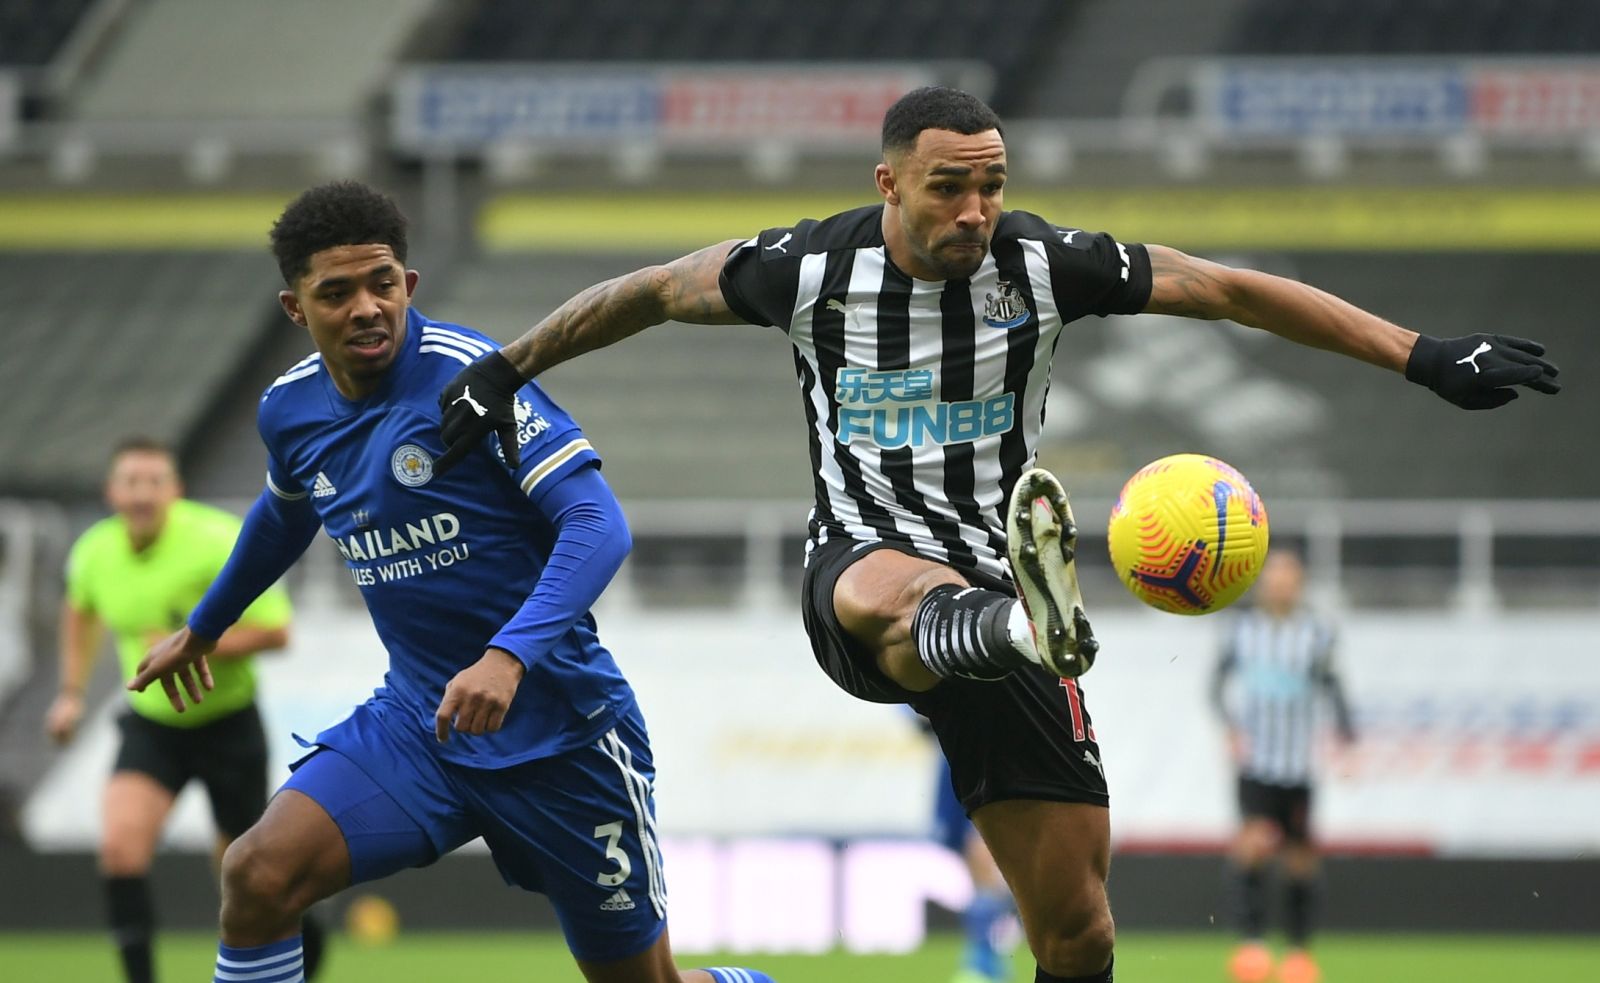 epa08916740 Callum Wilson (R) of Newcastle in action against Wesley Fofana (L) of Leicester during the English Premier League soccer match between Newcastle United and Leicester City in Newcastle, Britain, 03 January 2021.  EPA/Michael Regan / POOL EDITORIAL USE ONLY. No use with unauthorized audio, video, data, fixture lists, club/league logos or 'live' services. Online in-match use limited to 120 images, no video emulation. No use in betting, games or single club/league/player publications.